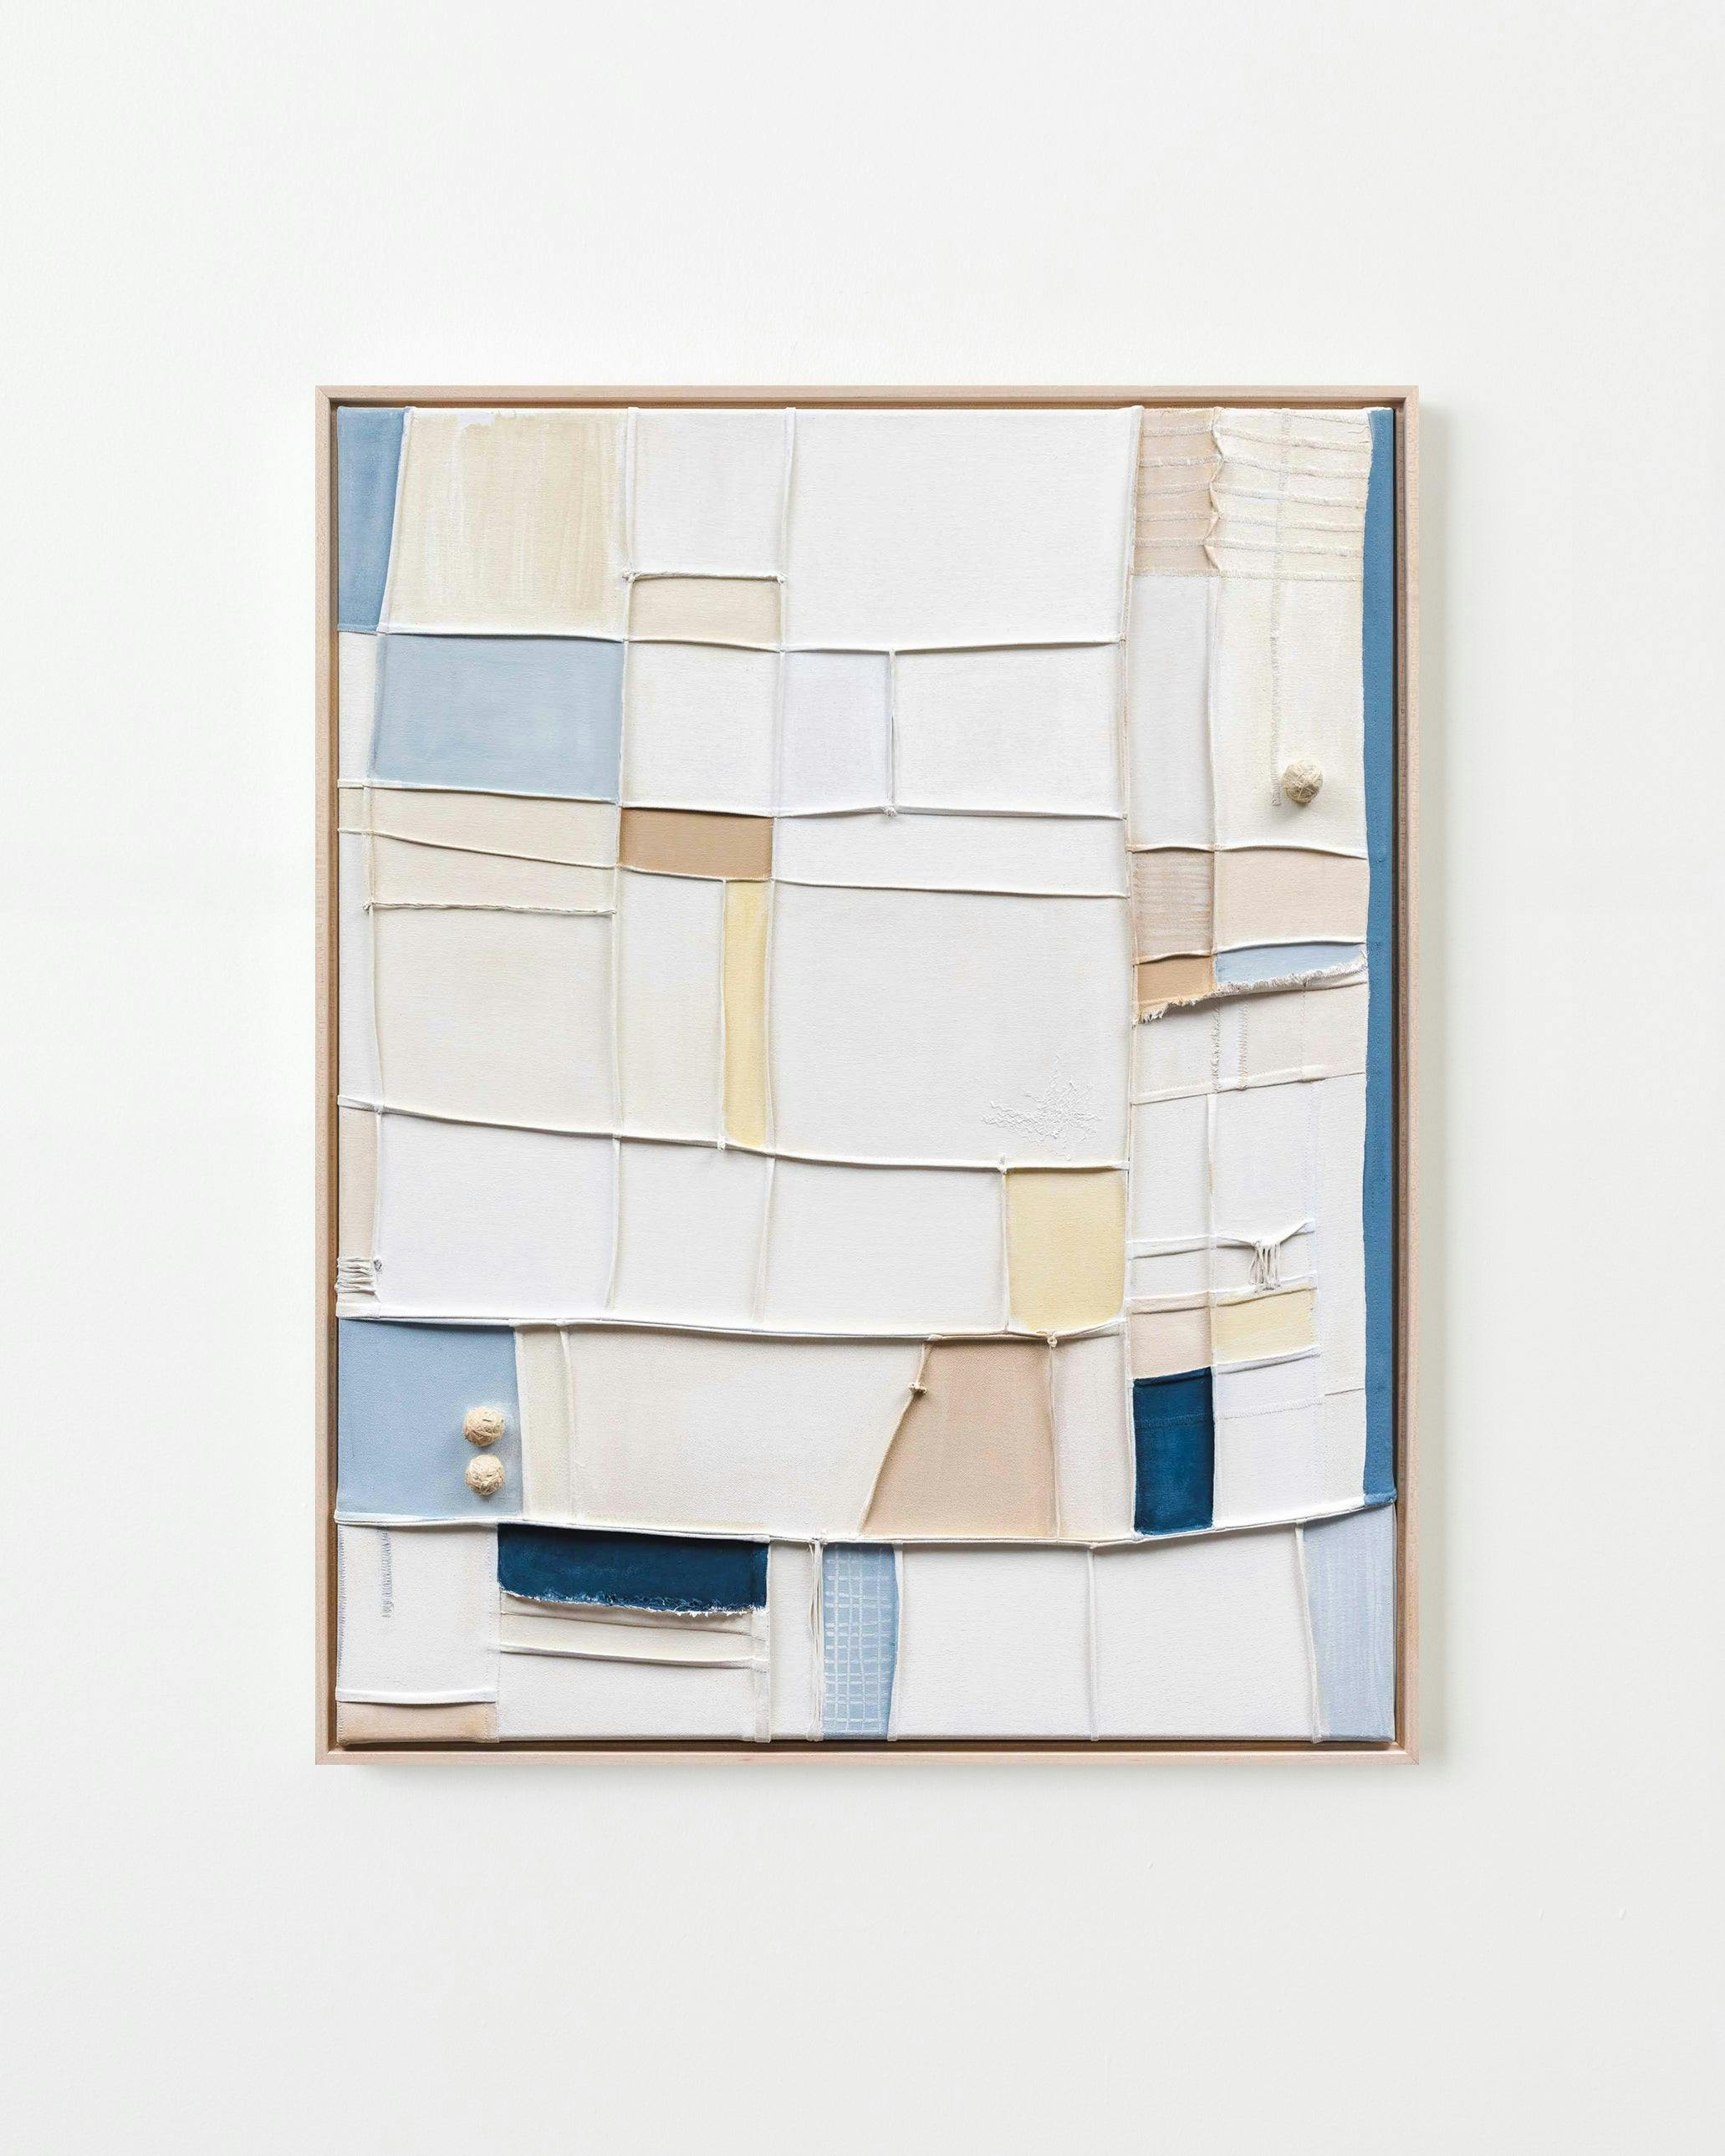 Painting by Nicole Anastas titled "Compartments 67".